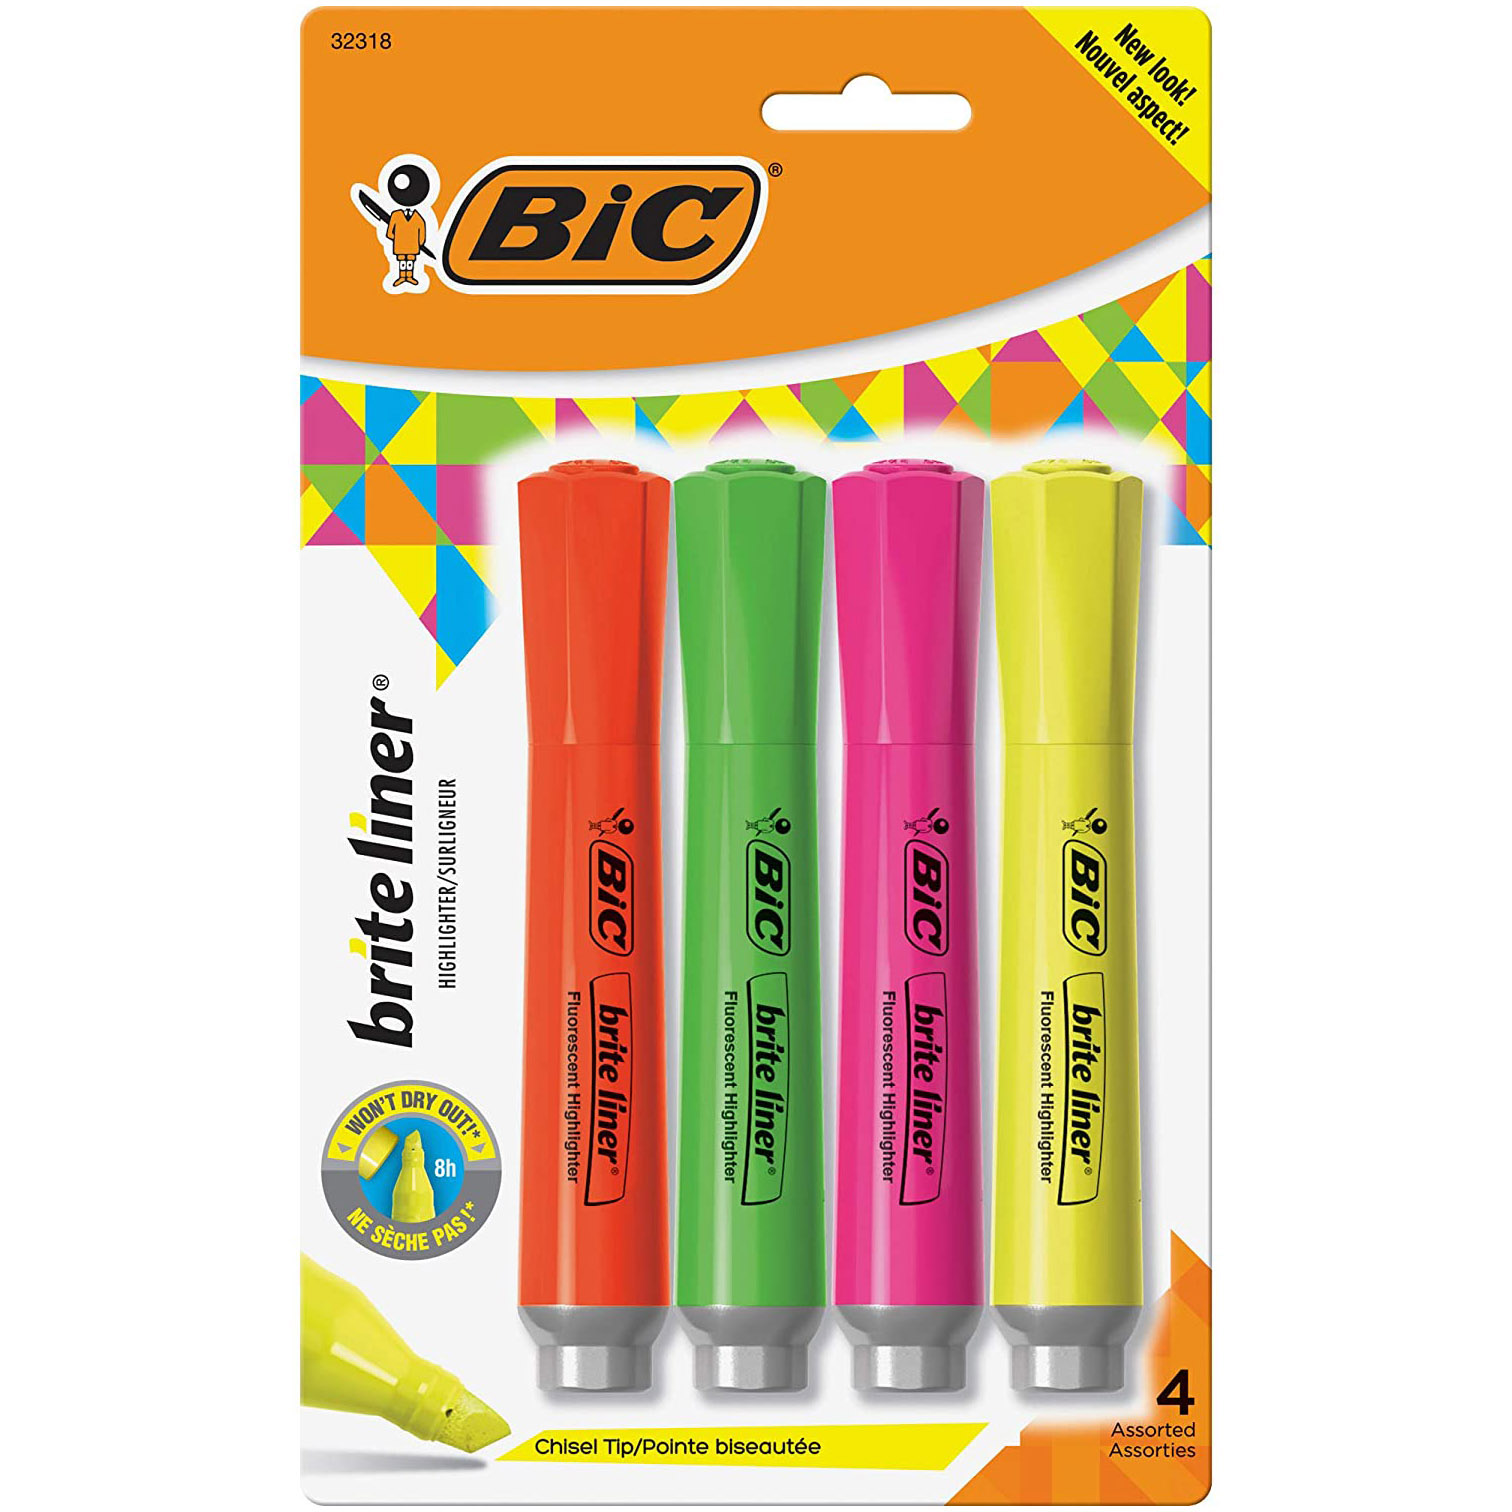 Bic Great Erase Low Odor Dry Erase Markers, Fine Point, 4 per Pack, 6 Packs